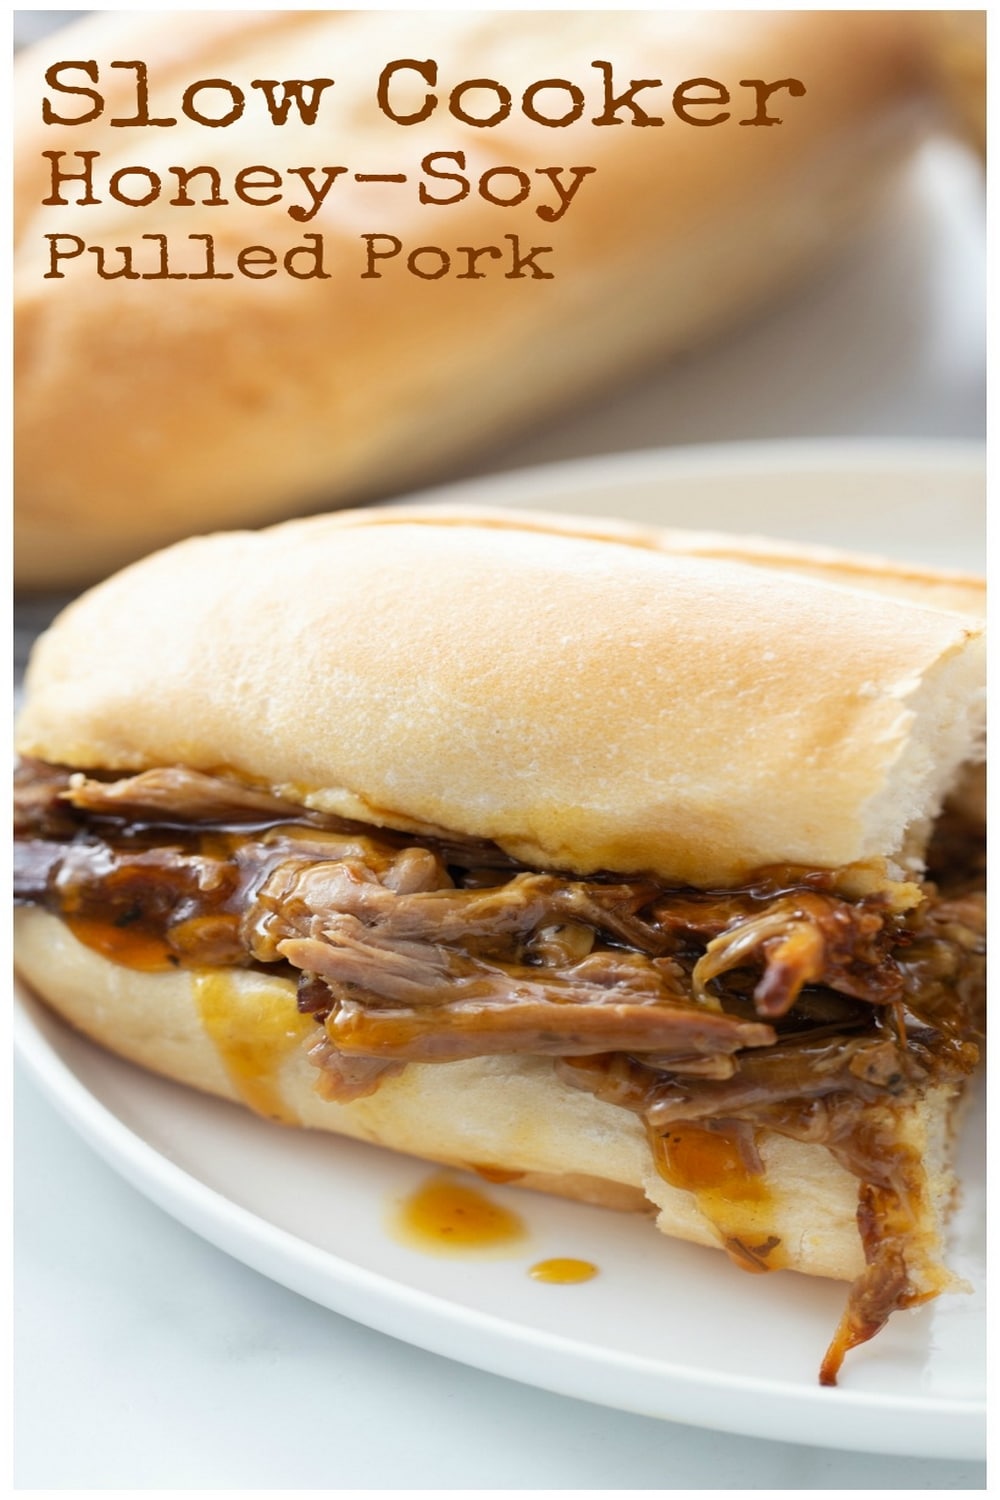 Rescuing your weeknight with a hassle-free slow-cooker masterpiece—truly a "set-it-and-forget-it" meal, with flavors that seem far more labor-intensive. This pulled pork, prepared in just 10 minutes, is the ultimate comfort food dinner idea. Perfect for pulled pork slow cooker and crock pot enthusiasts and those seeking easy dinner ideas. Enjoy on your preferred soft or crusty bun for a satisfying pulled pork sandwiches experience.  via @cmpollak1